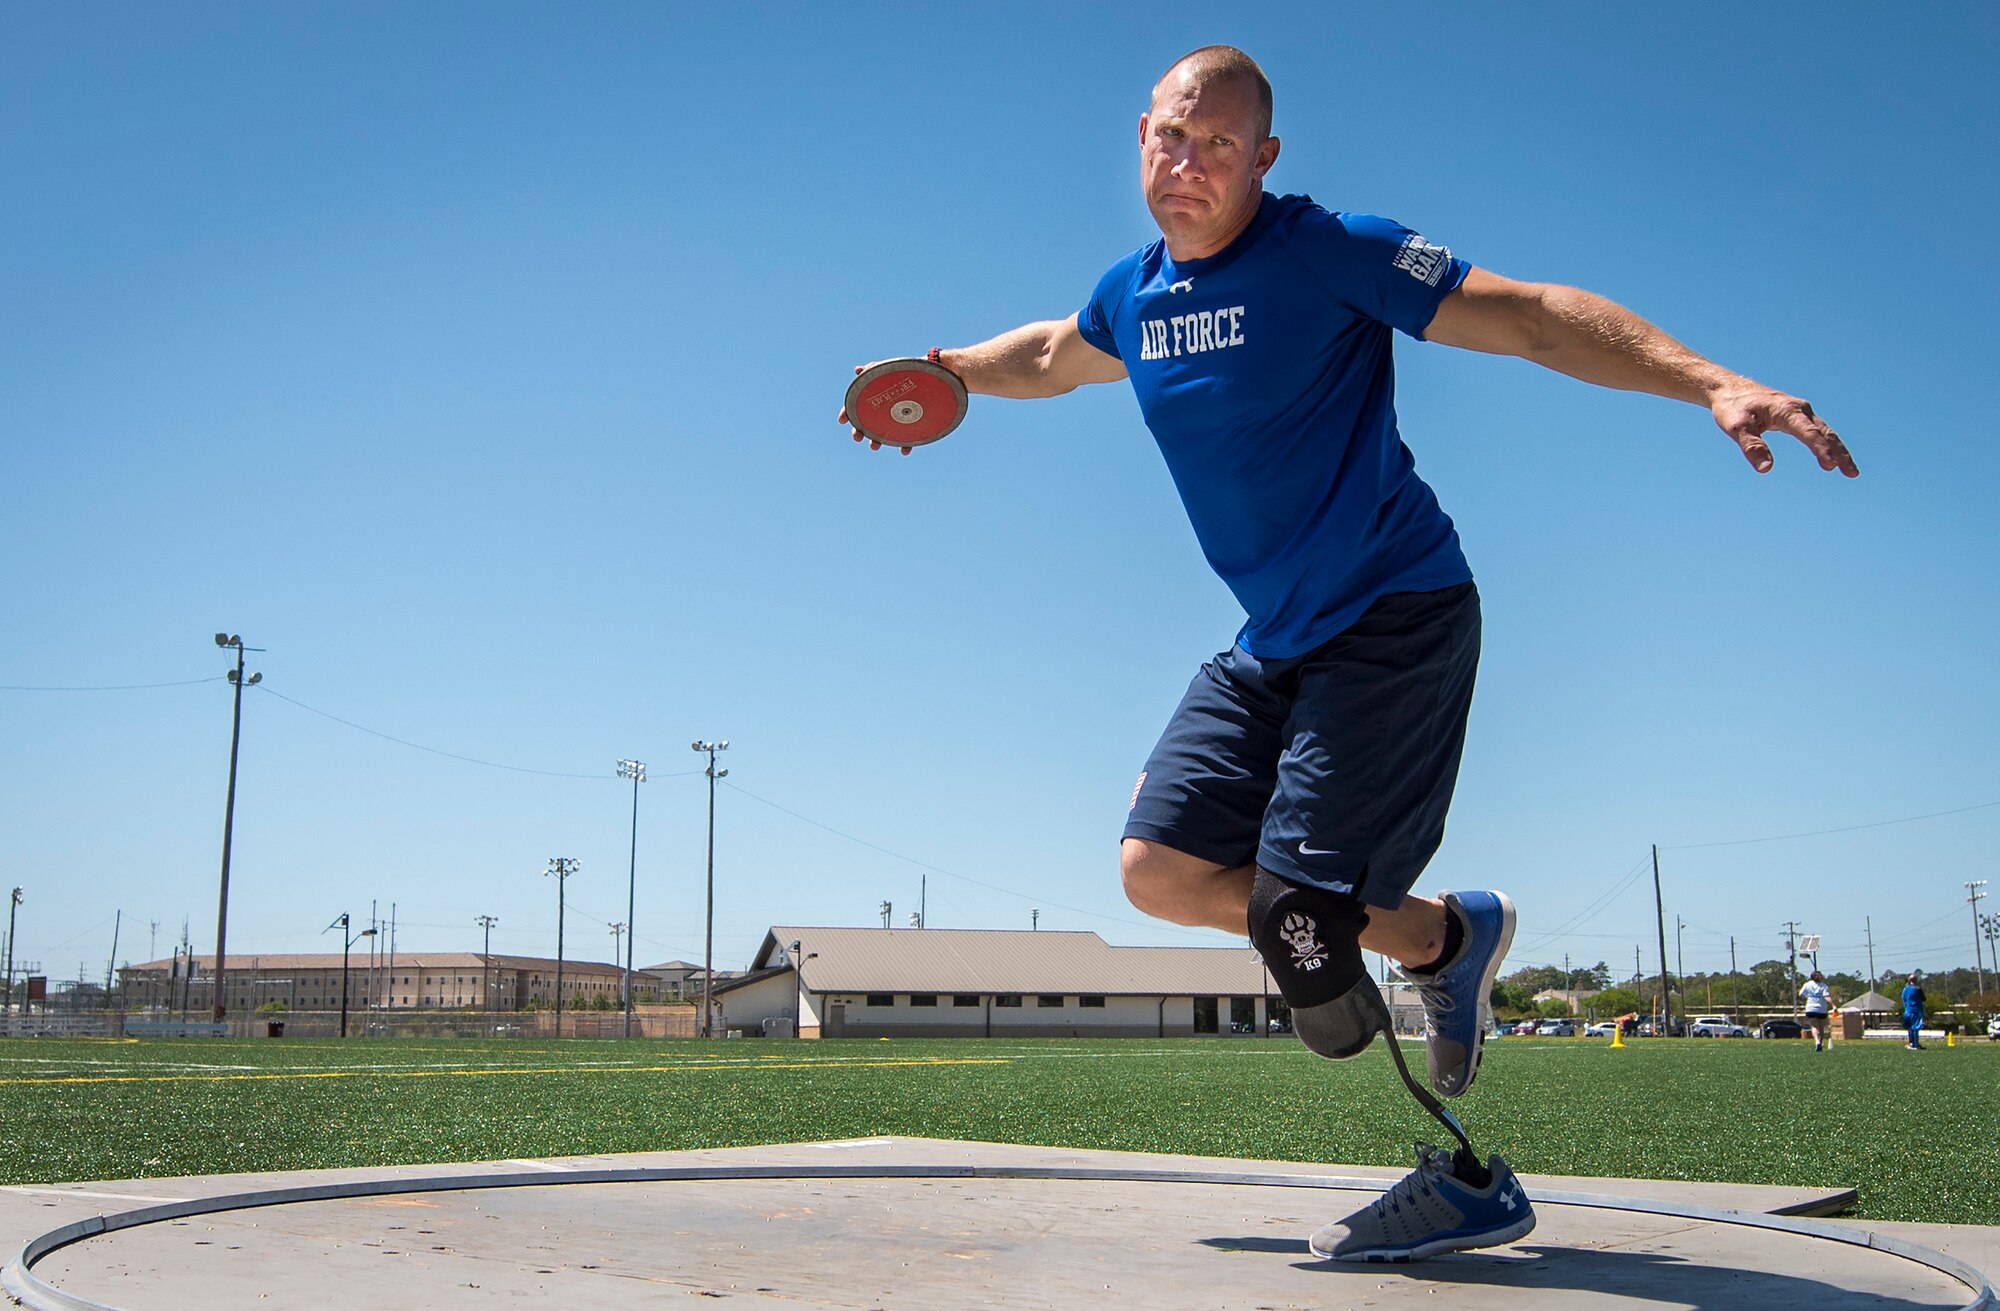 Ben Seekell, Warrior Games athlete, goes into his discus rotation